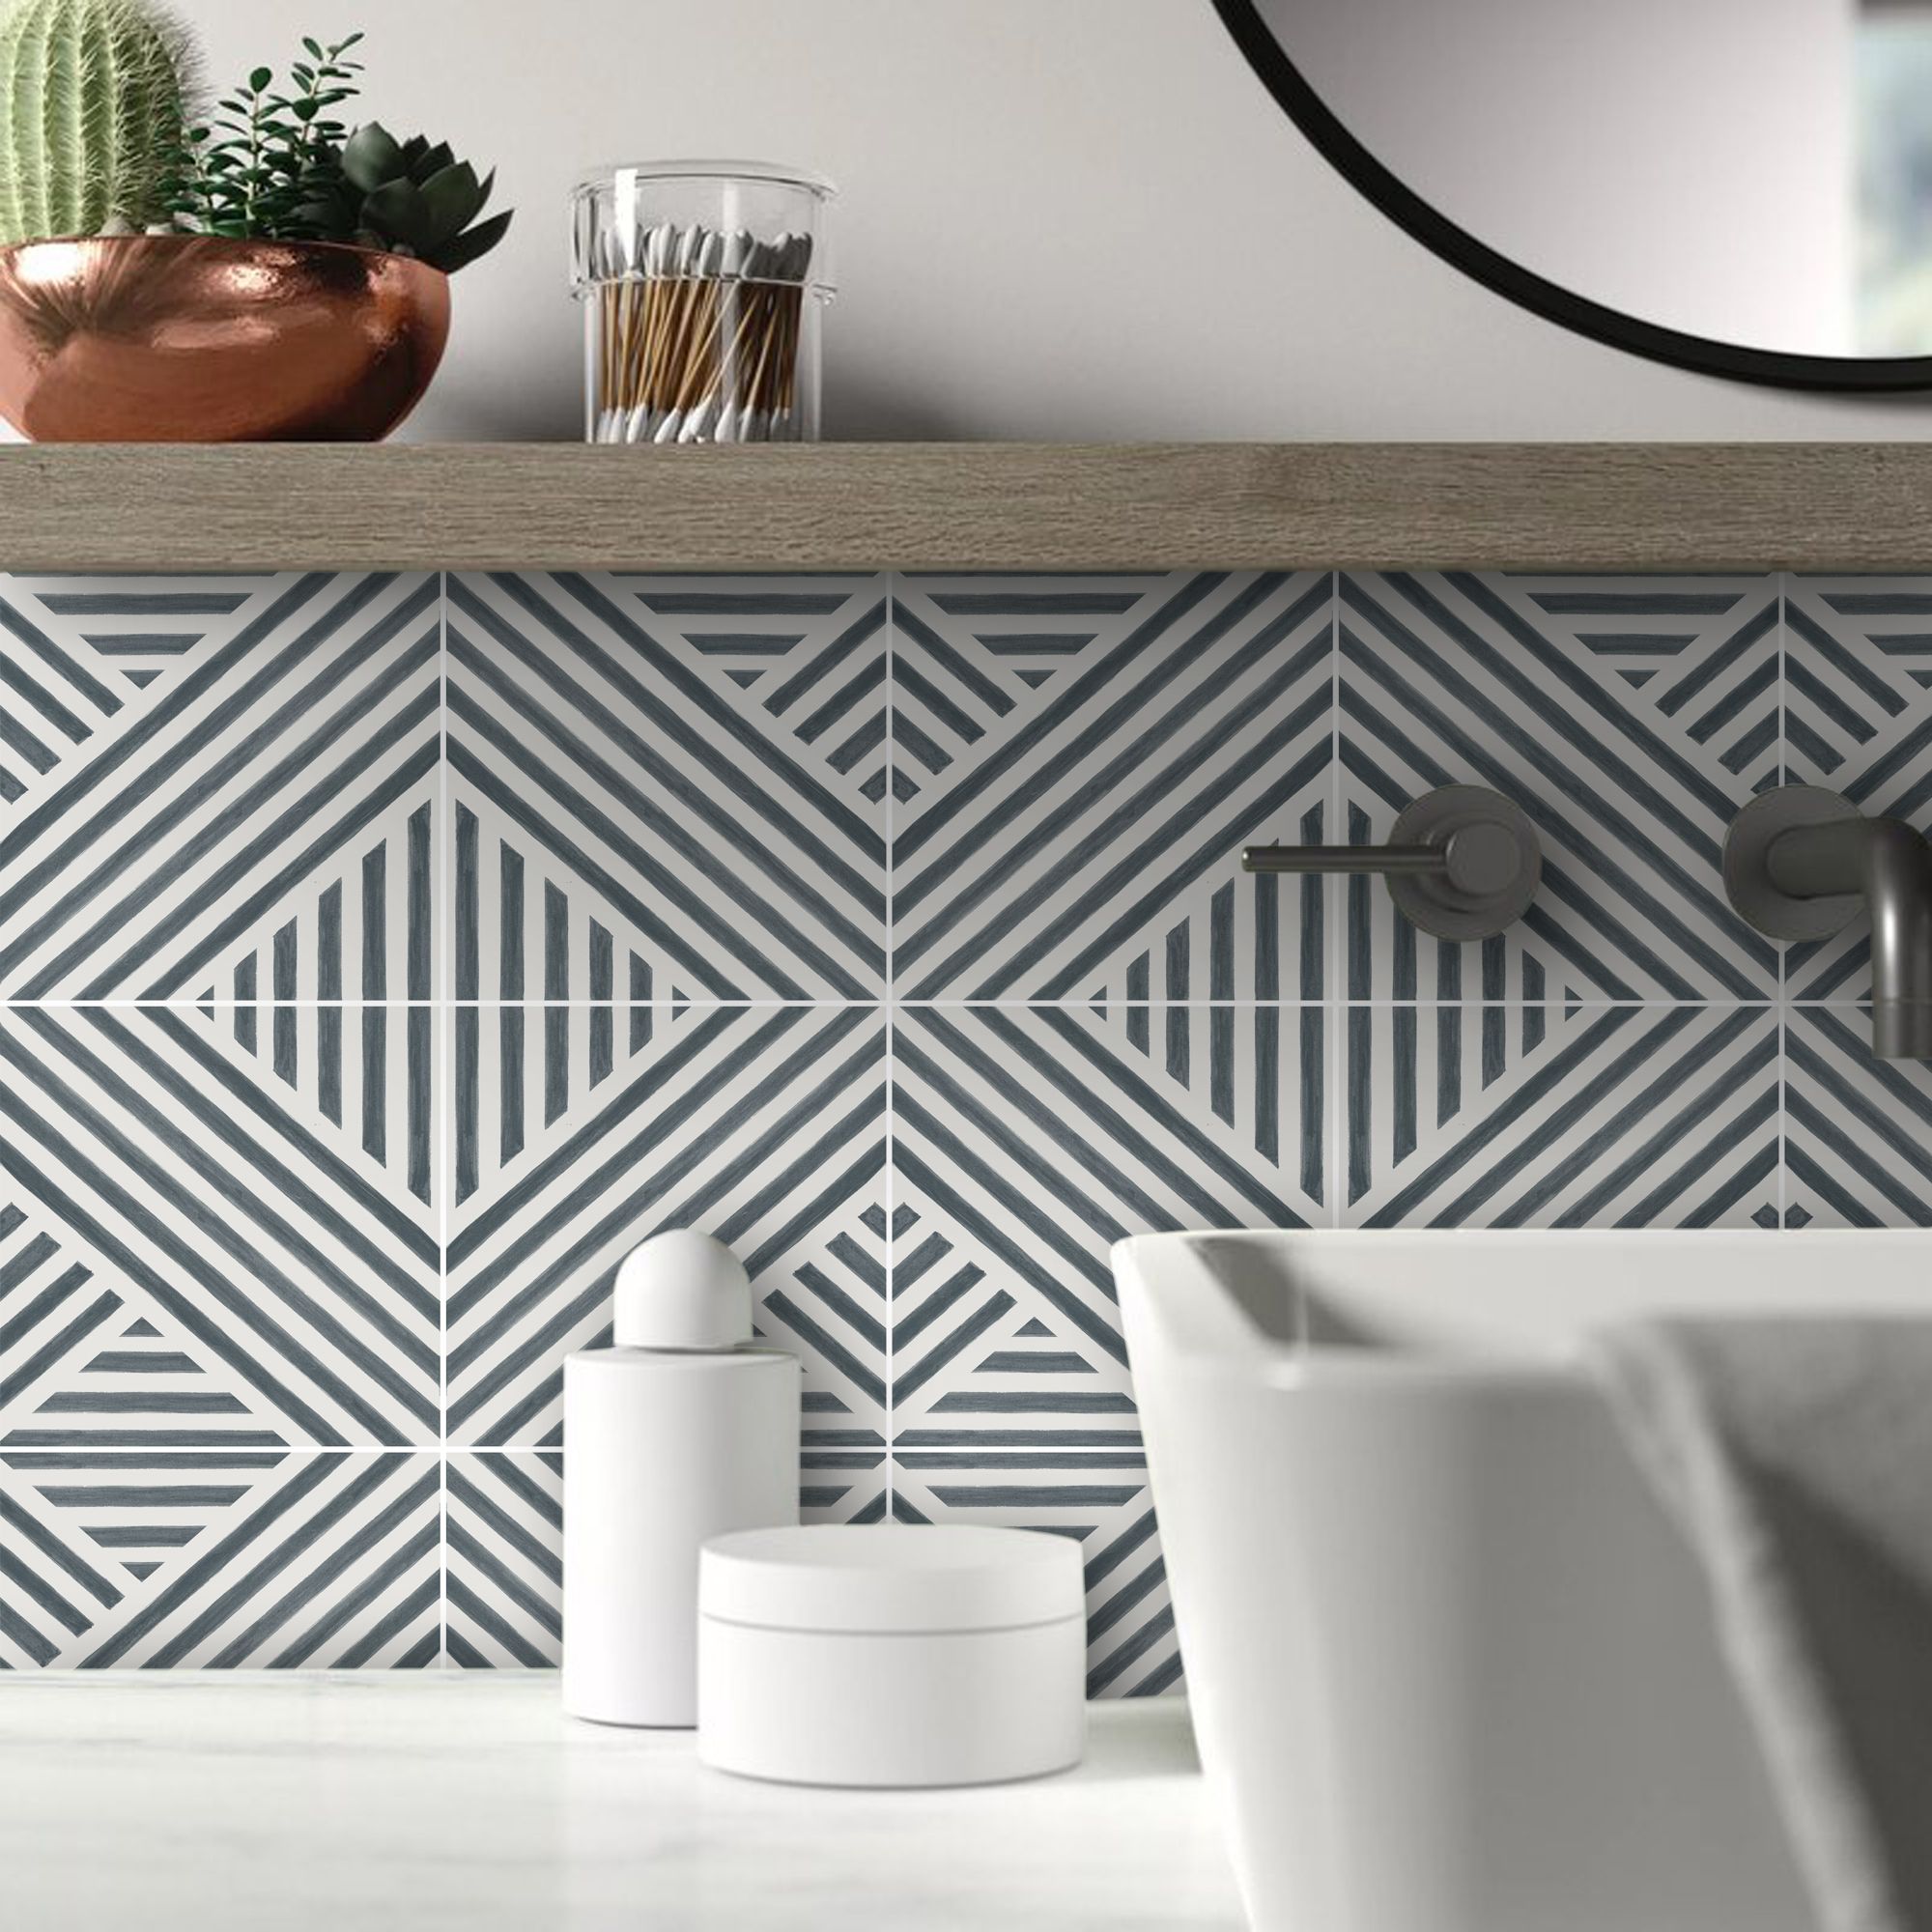 Give Your Bathroom a Fresh Look With Tile Stickers